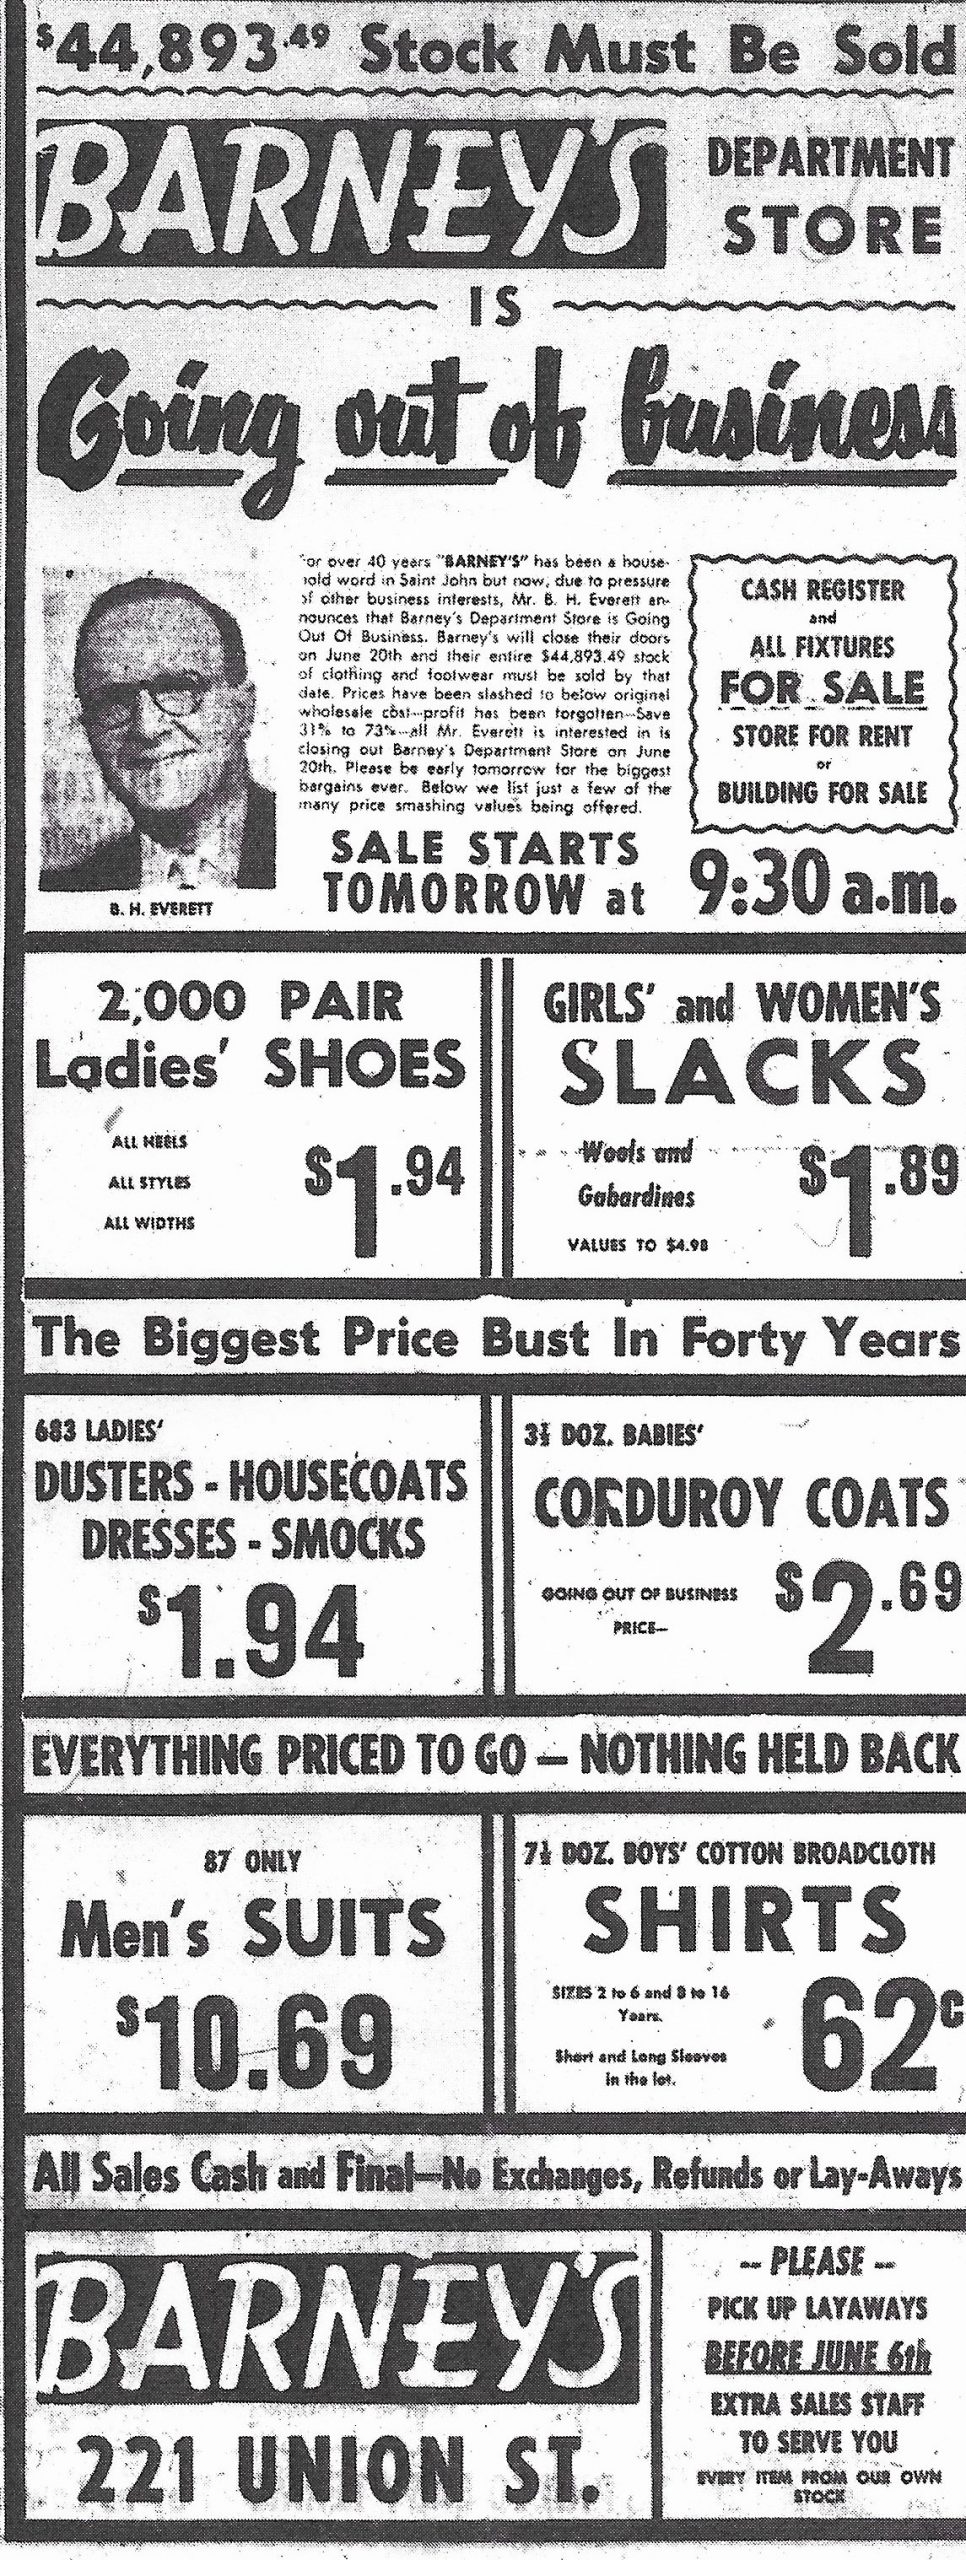 Newspaper advertisement –“Barney’s Department Store is Going Out of Business” – listing of men’s and women’s clothing and shoes.